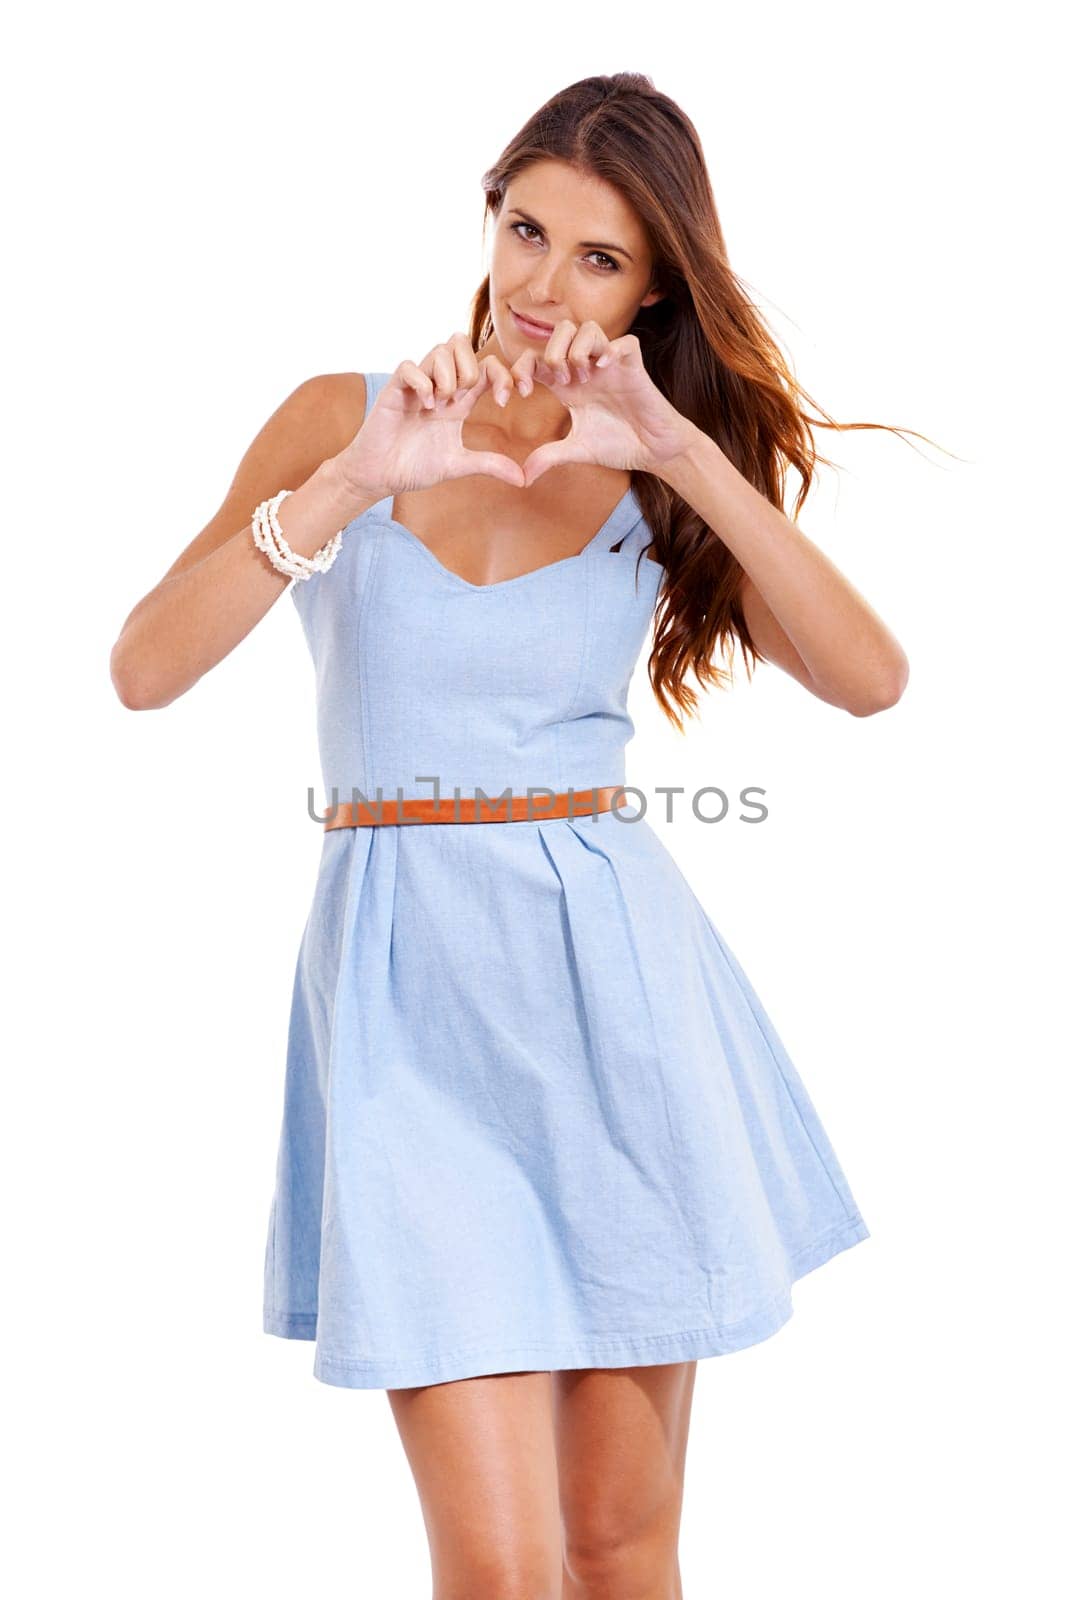 Portrait, heart and hands of woman for love, care or support isolated on white studio background for peace. Emoji, romance and person with hand gesture for kindness, valentines day and thank you sign.